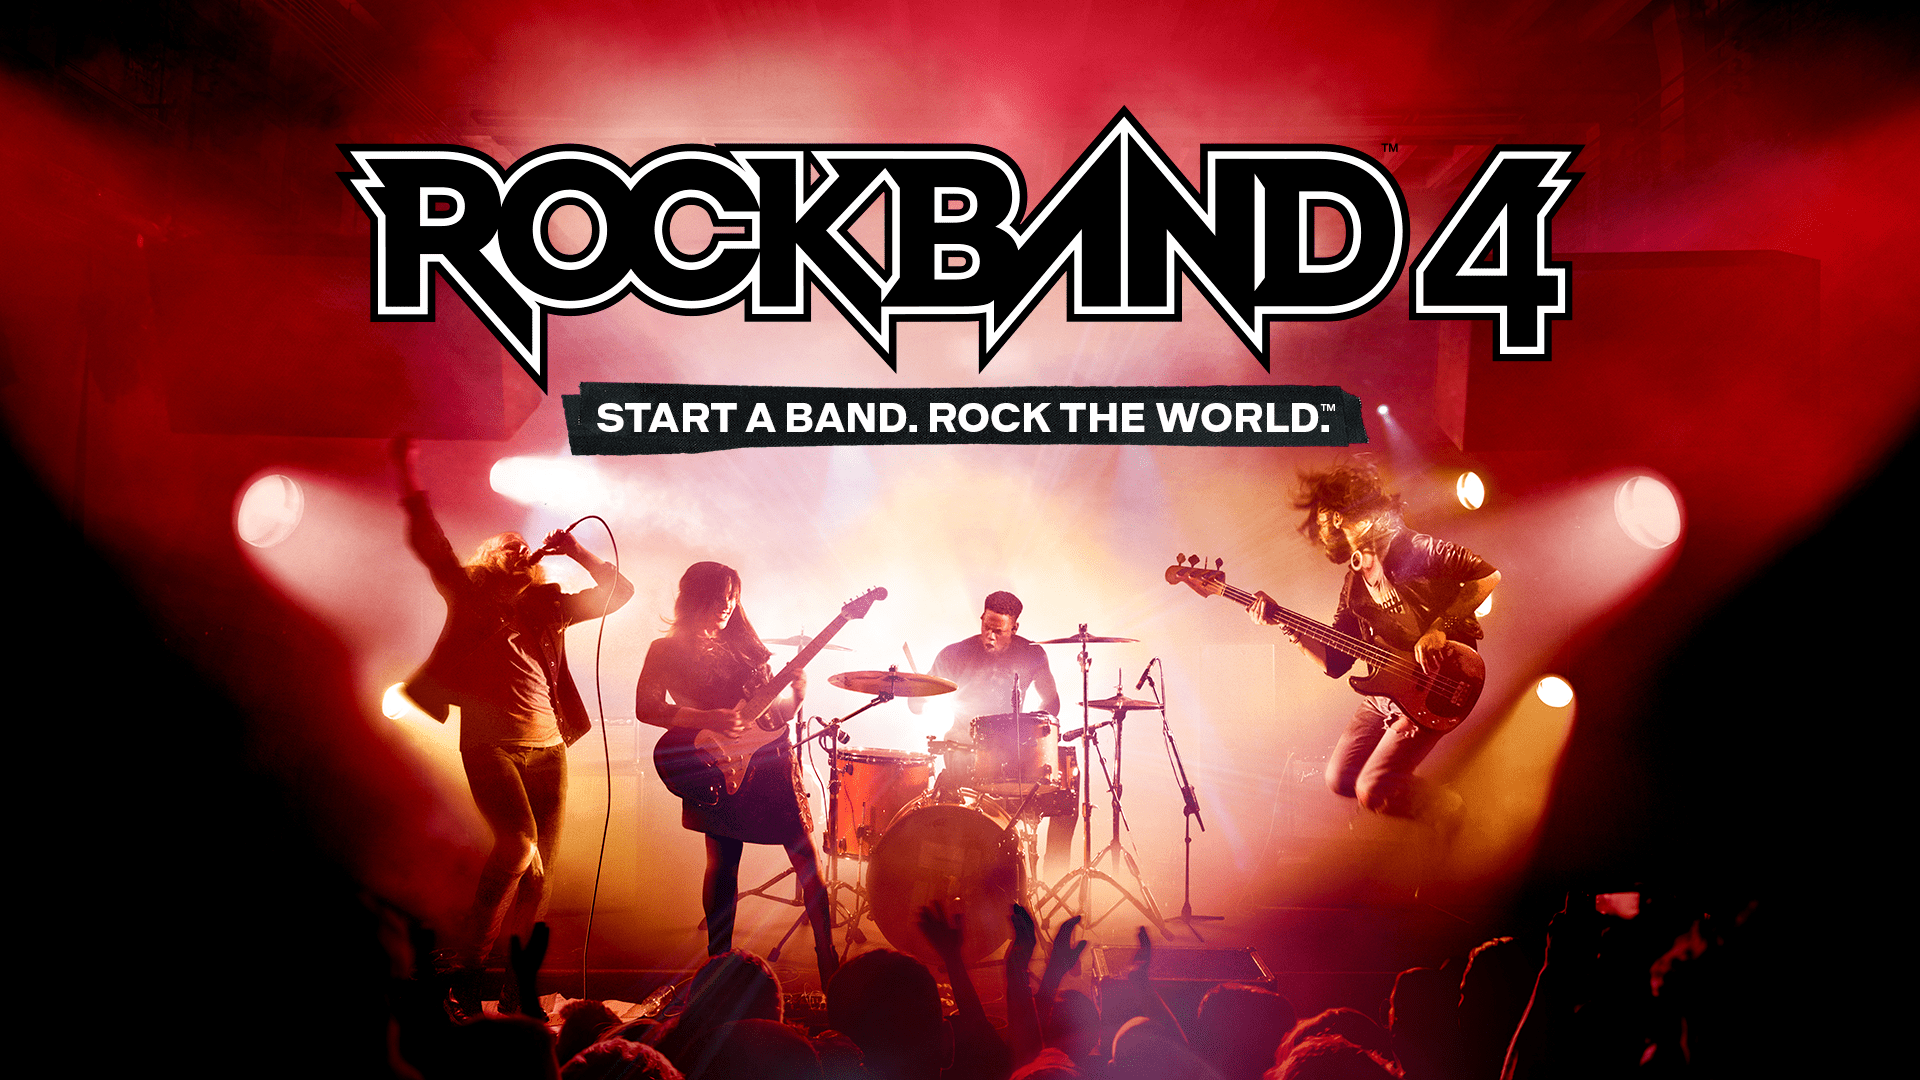 Turn That Dial To 11, It’s New Rock Band 4 Information Time!